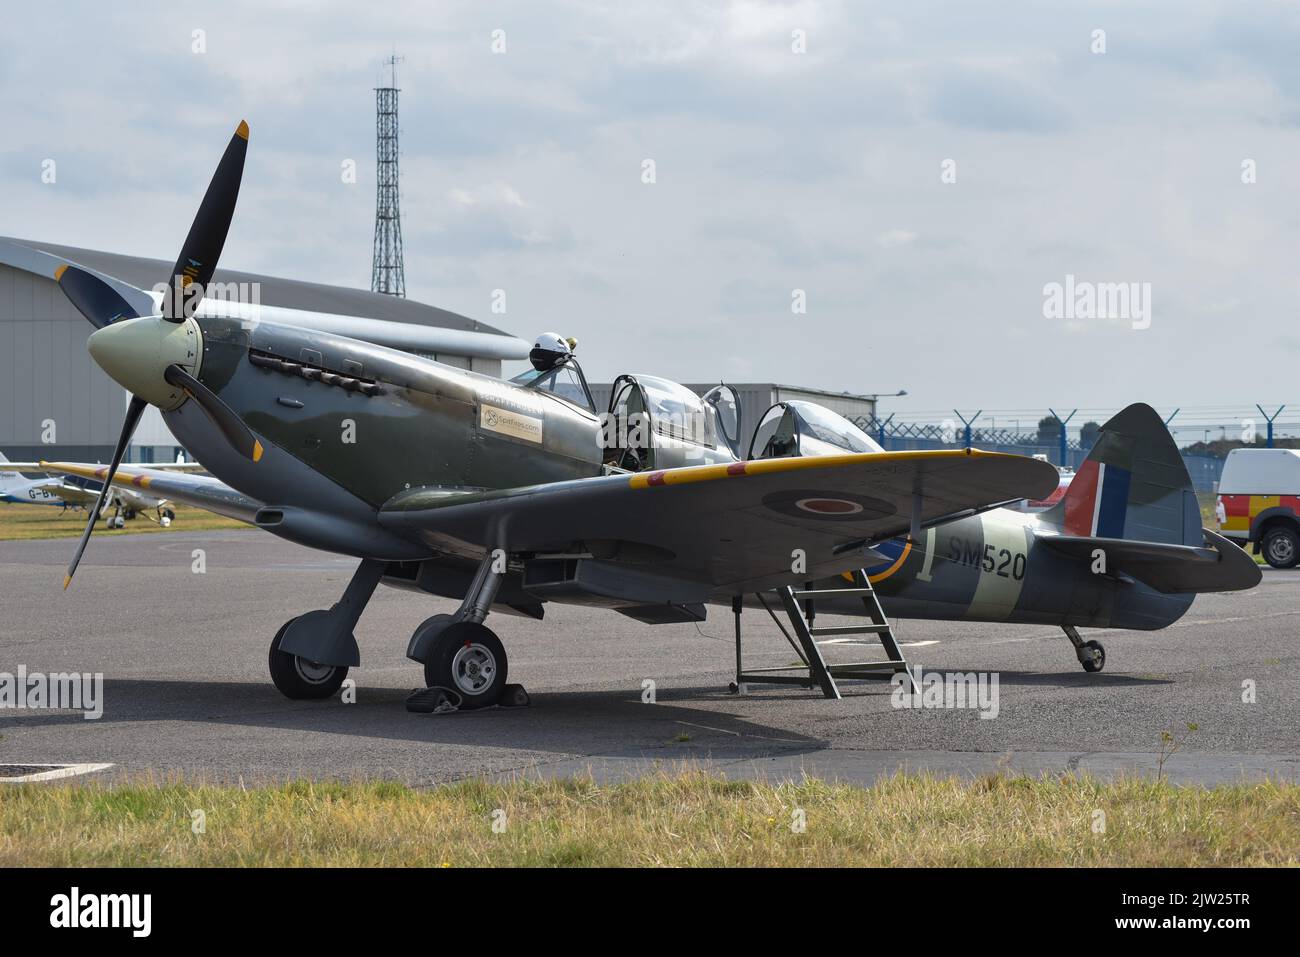 SM250 twin seat Spitfire parked on the runway of Solent airport in England. Stock Photo